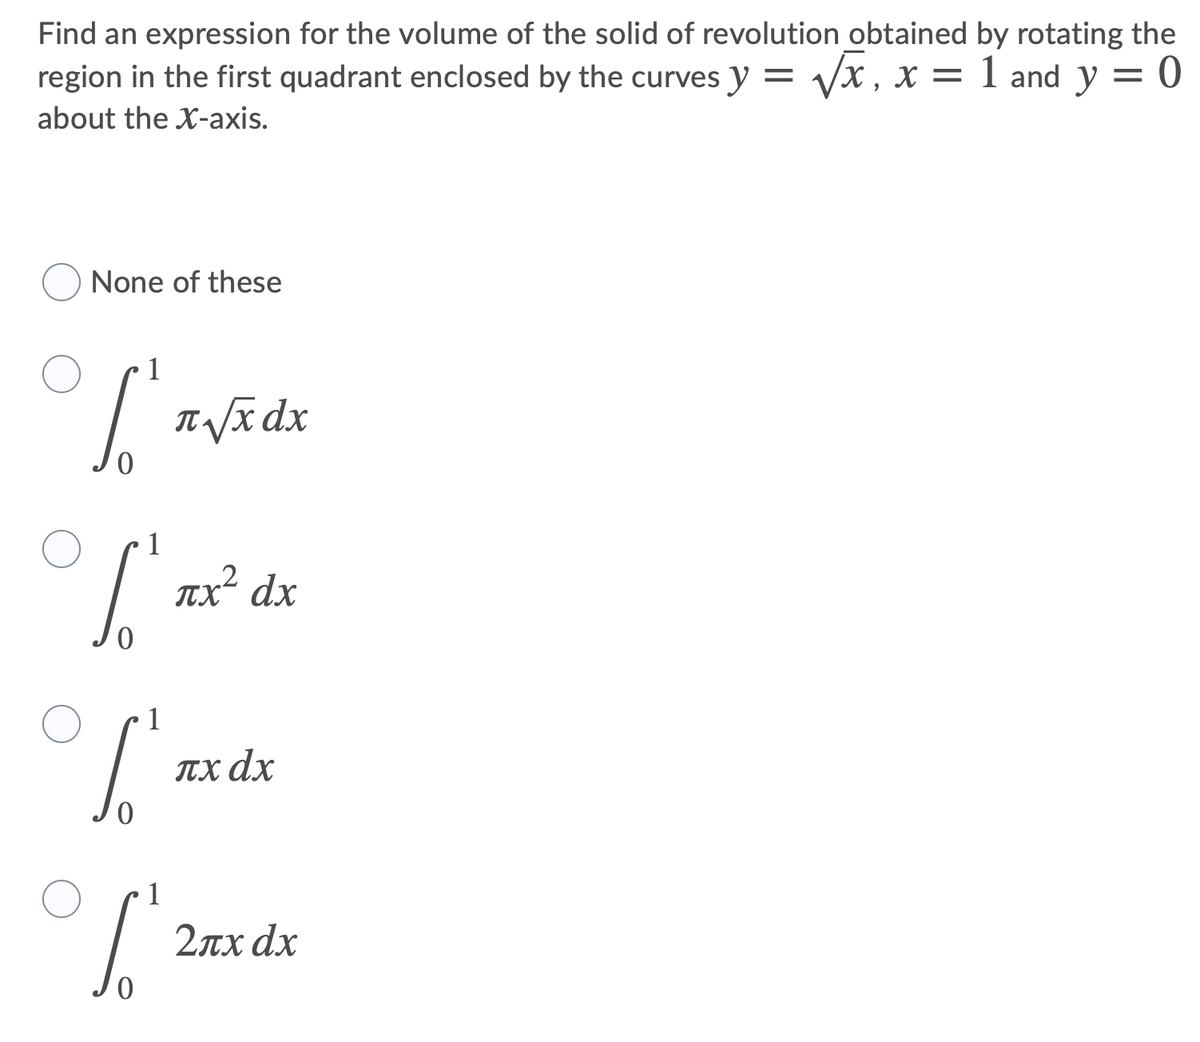 Find an expression for the volume of the solid of revolution obtained by rotating the
region in the first quadrant enclosed by the curves y = Vx , x = 1 and y = 0
about the X-axis.
None of these
T /x dx
TX dx
ITX dx
2лх dx
